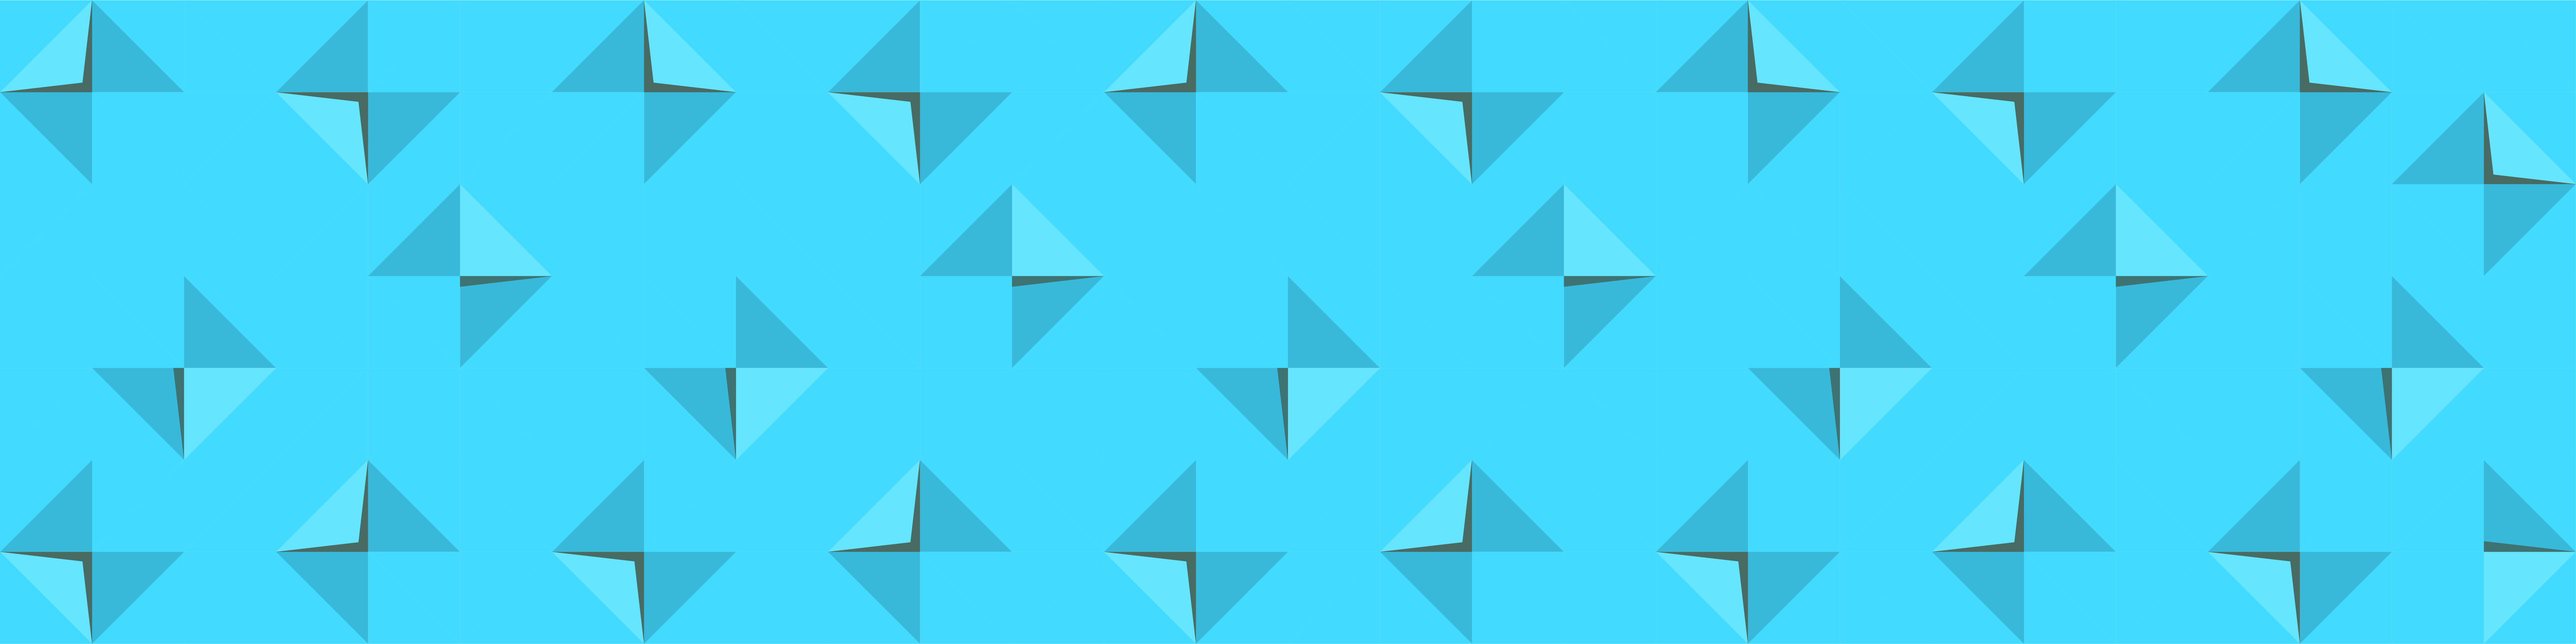 Featured Image Origami Origami Blue Lots